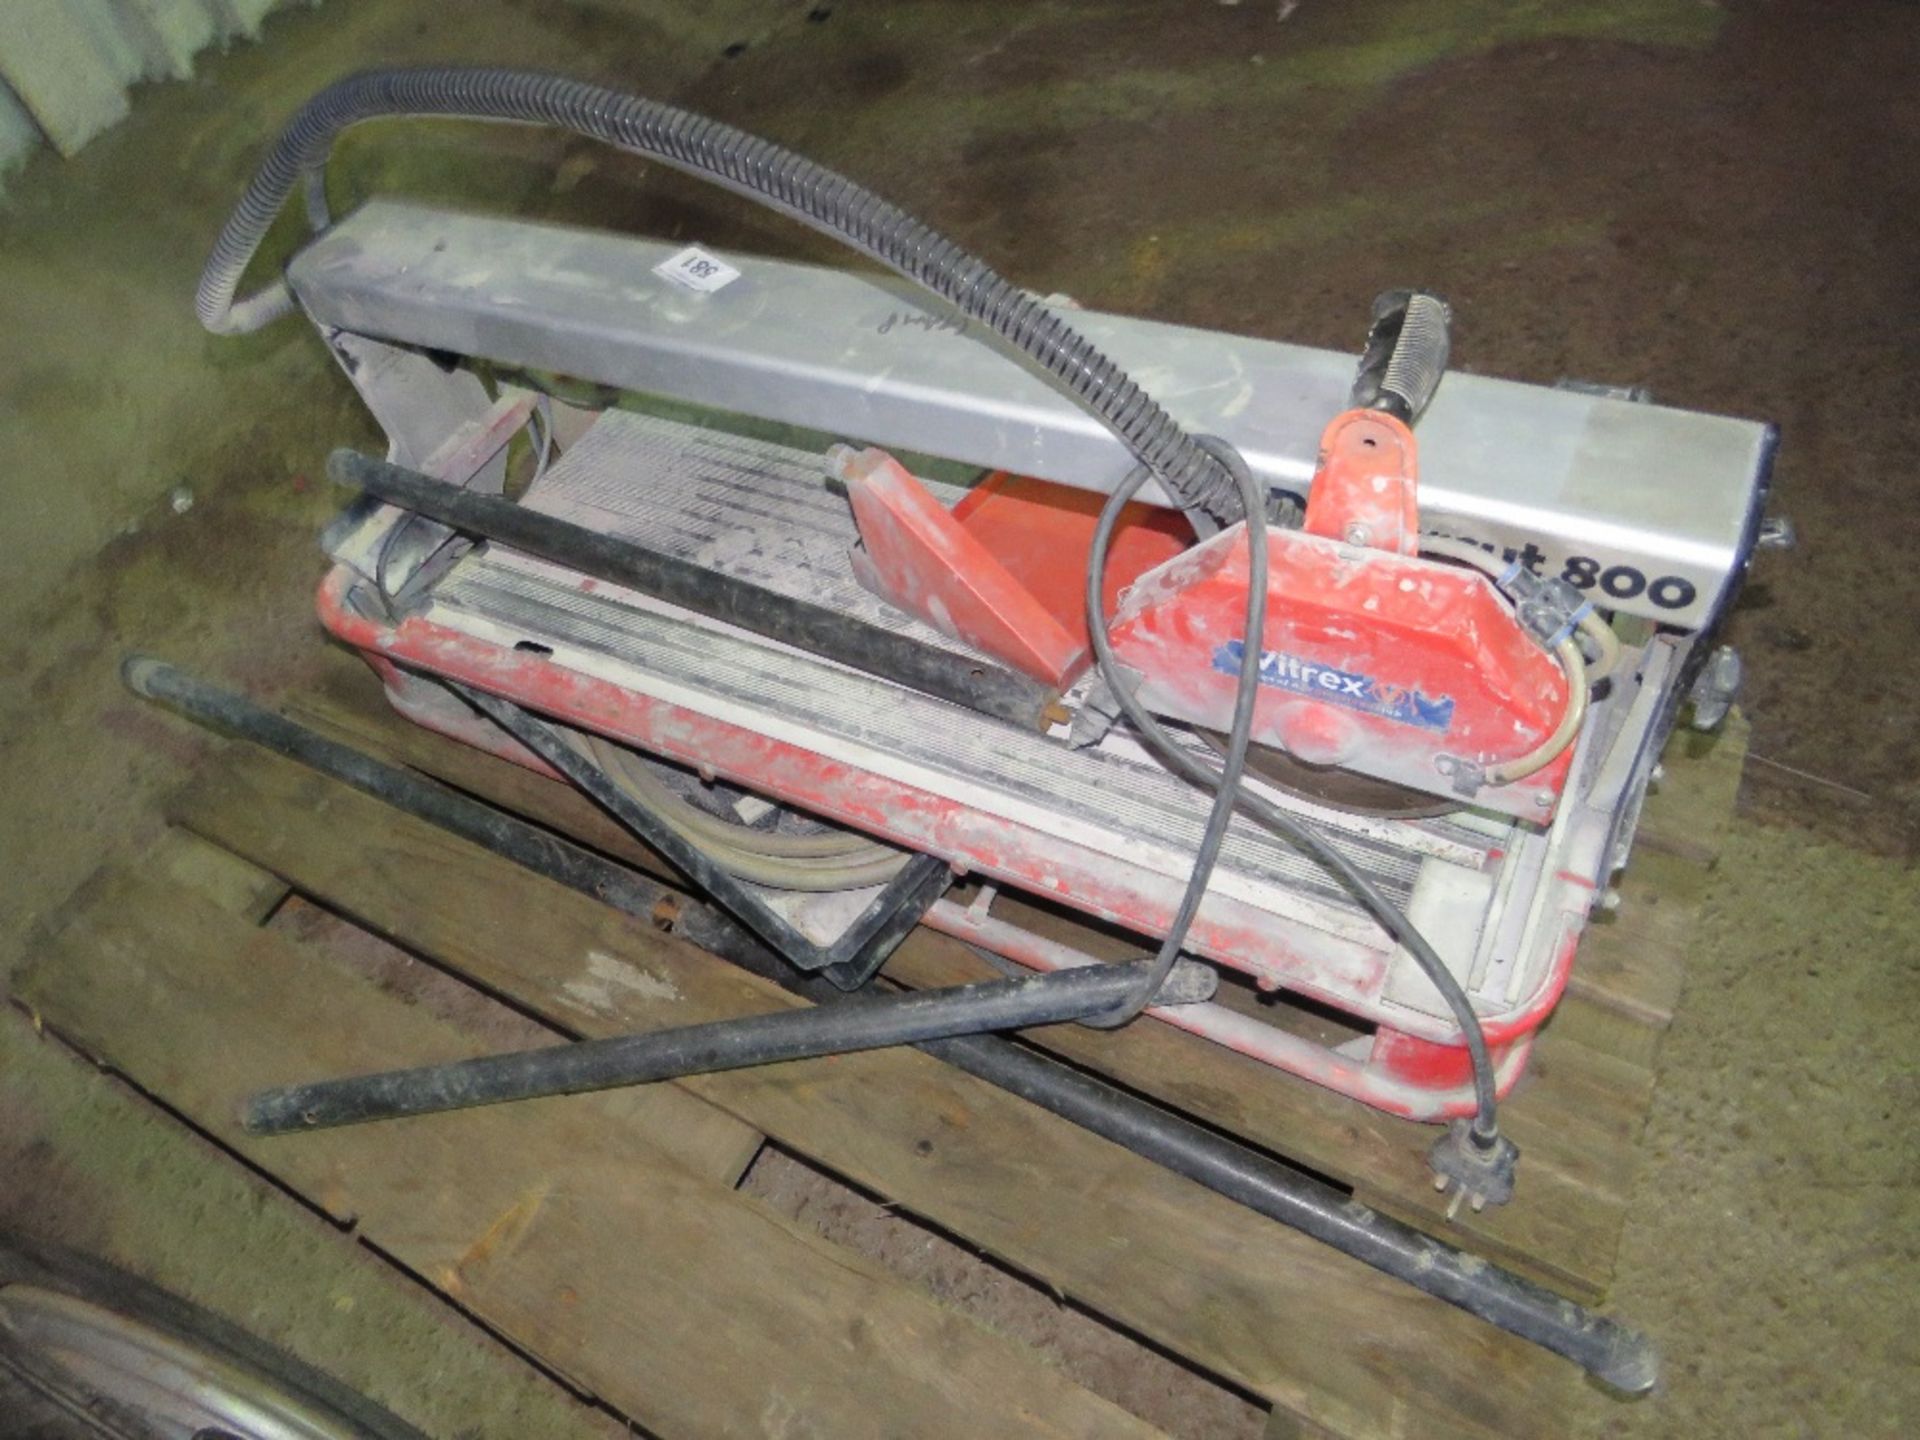 TILE CUTTING SAWBENCH WITH LEGS, 240VOLT POWERED. THIS LOT IS SOLD UNDER THE AUCTIONEERS MARGIN S - Image 2 of 2